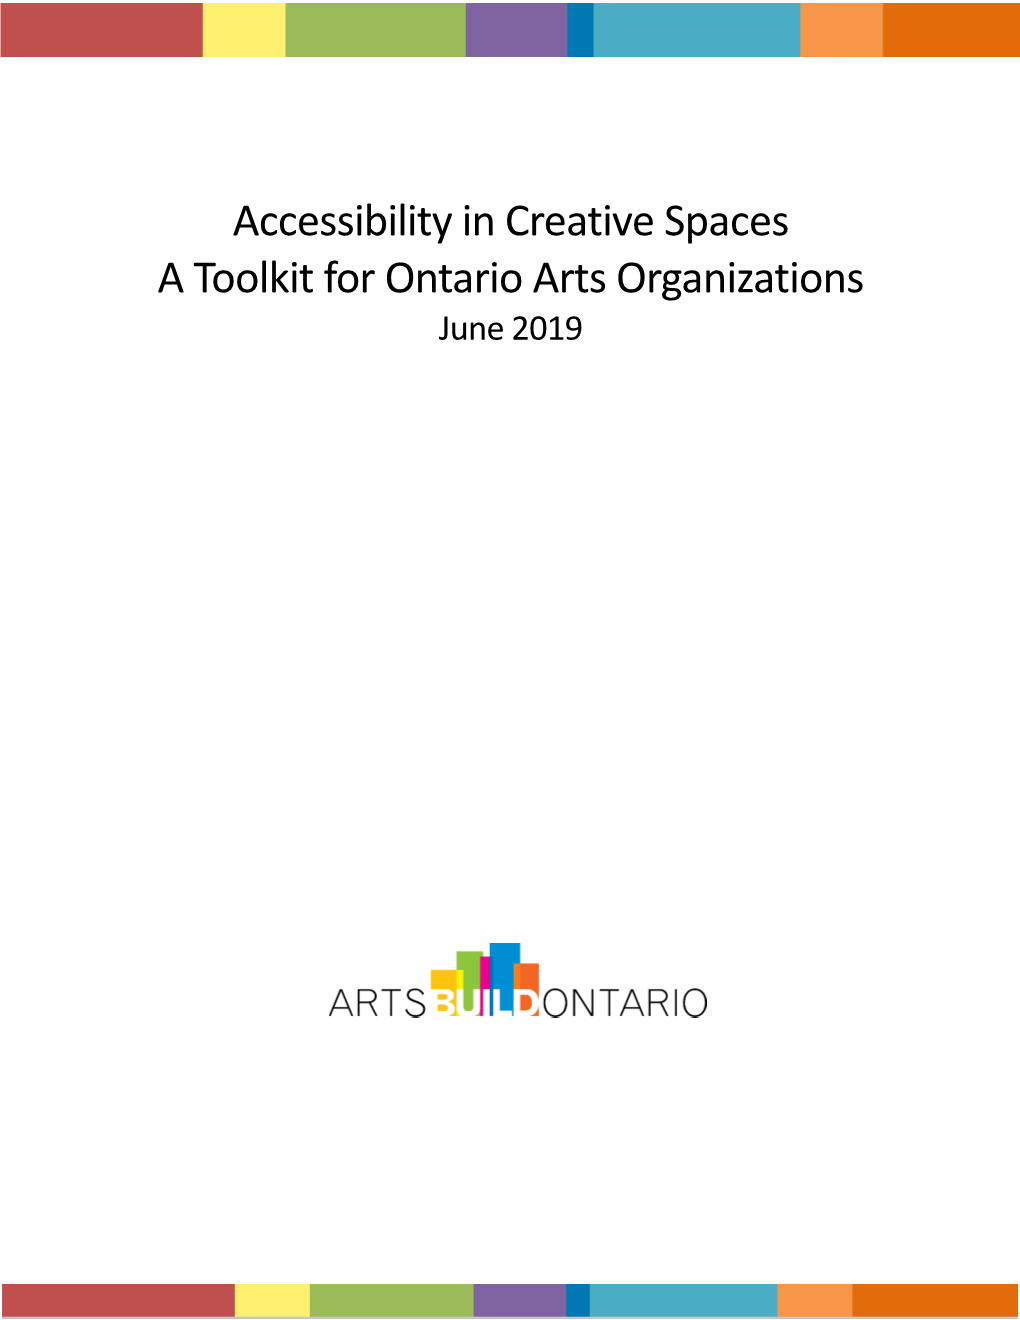 Accessibility in Creative Spaces a Toolkit for Ontario Arts Organizations June 2019